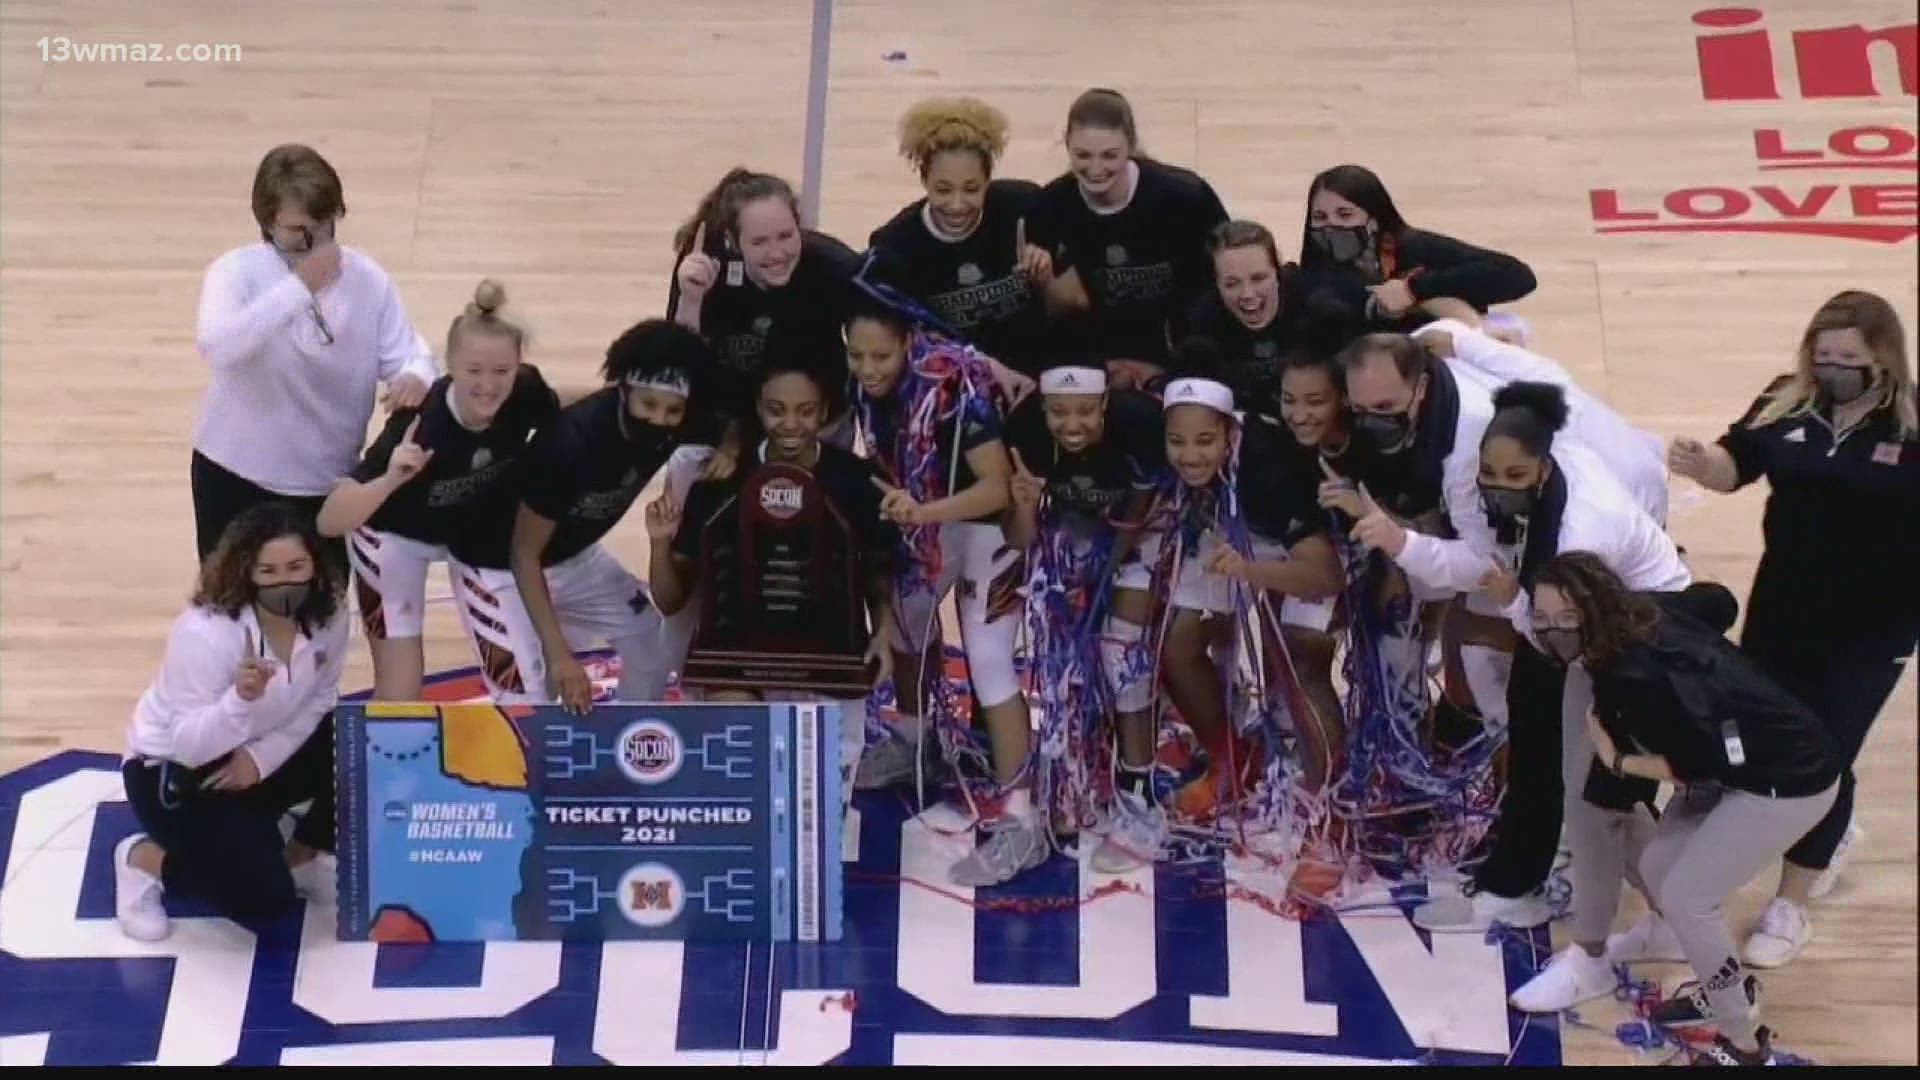 Mercer's women beat Wofford 60-38 to claim their third championship in four years